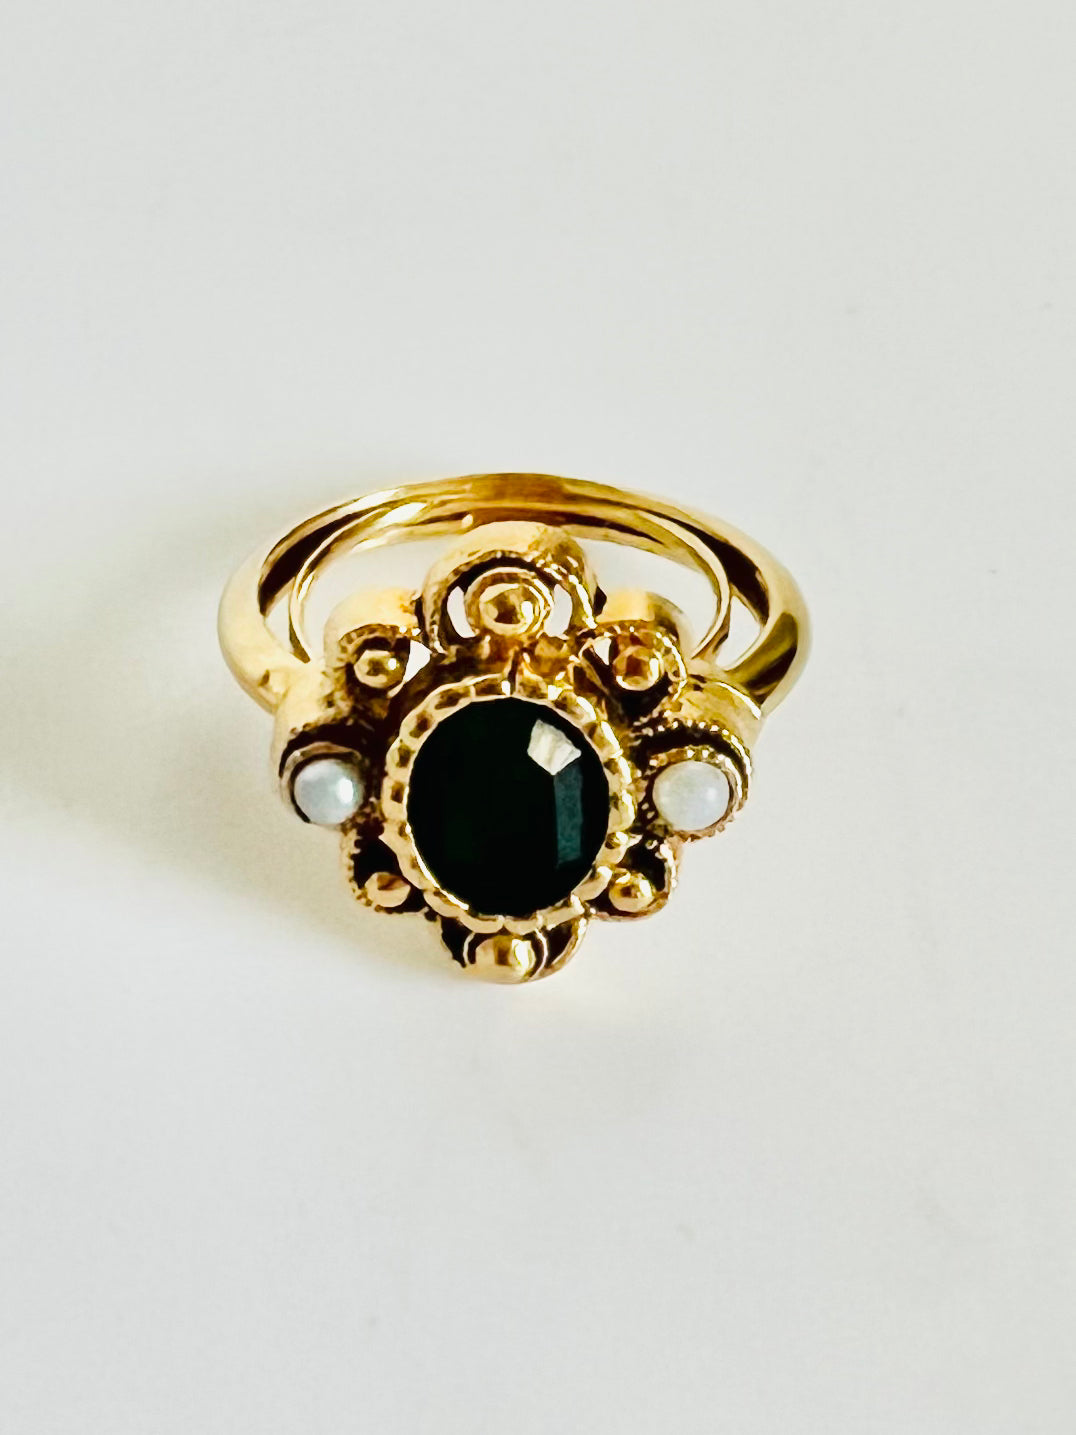 Vintage Avon Green Glass and Faux Pearl Ring